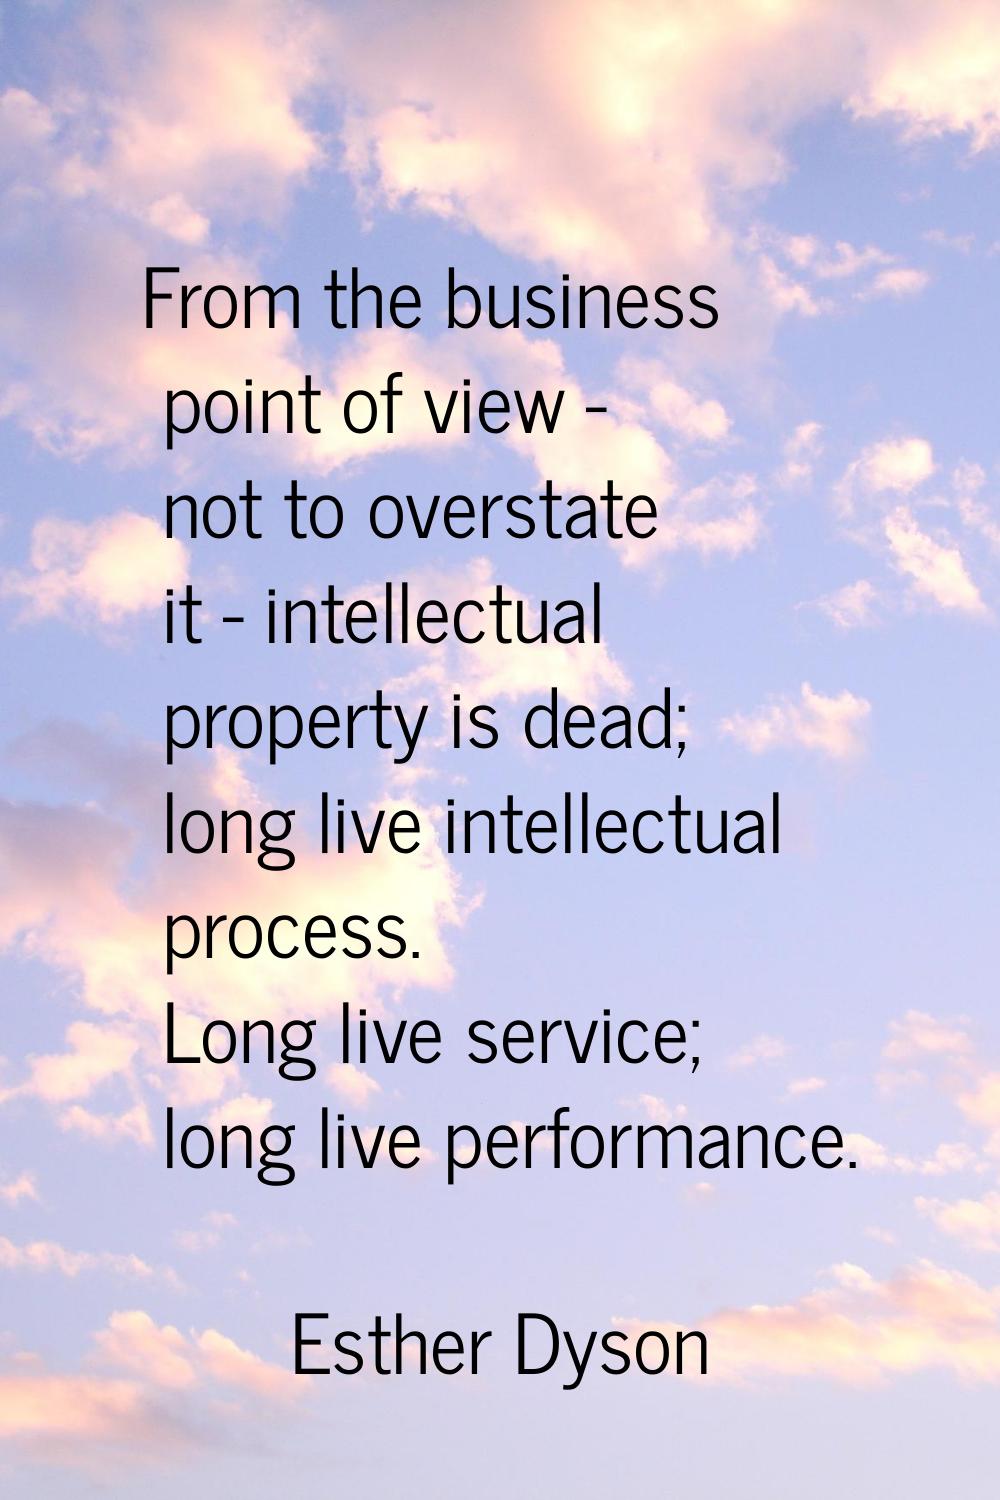 From the business point of view - not to overstate it - intellectual property is dead; long live in